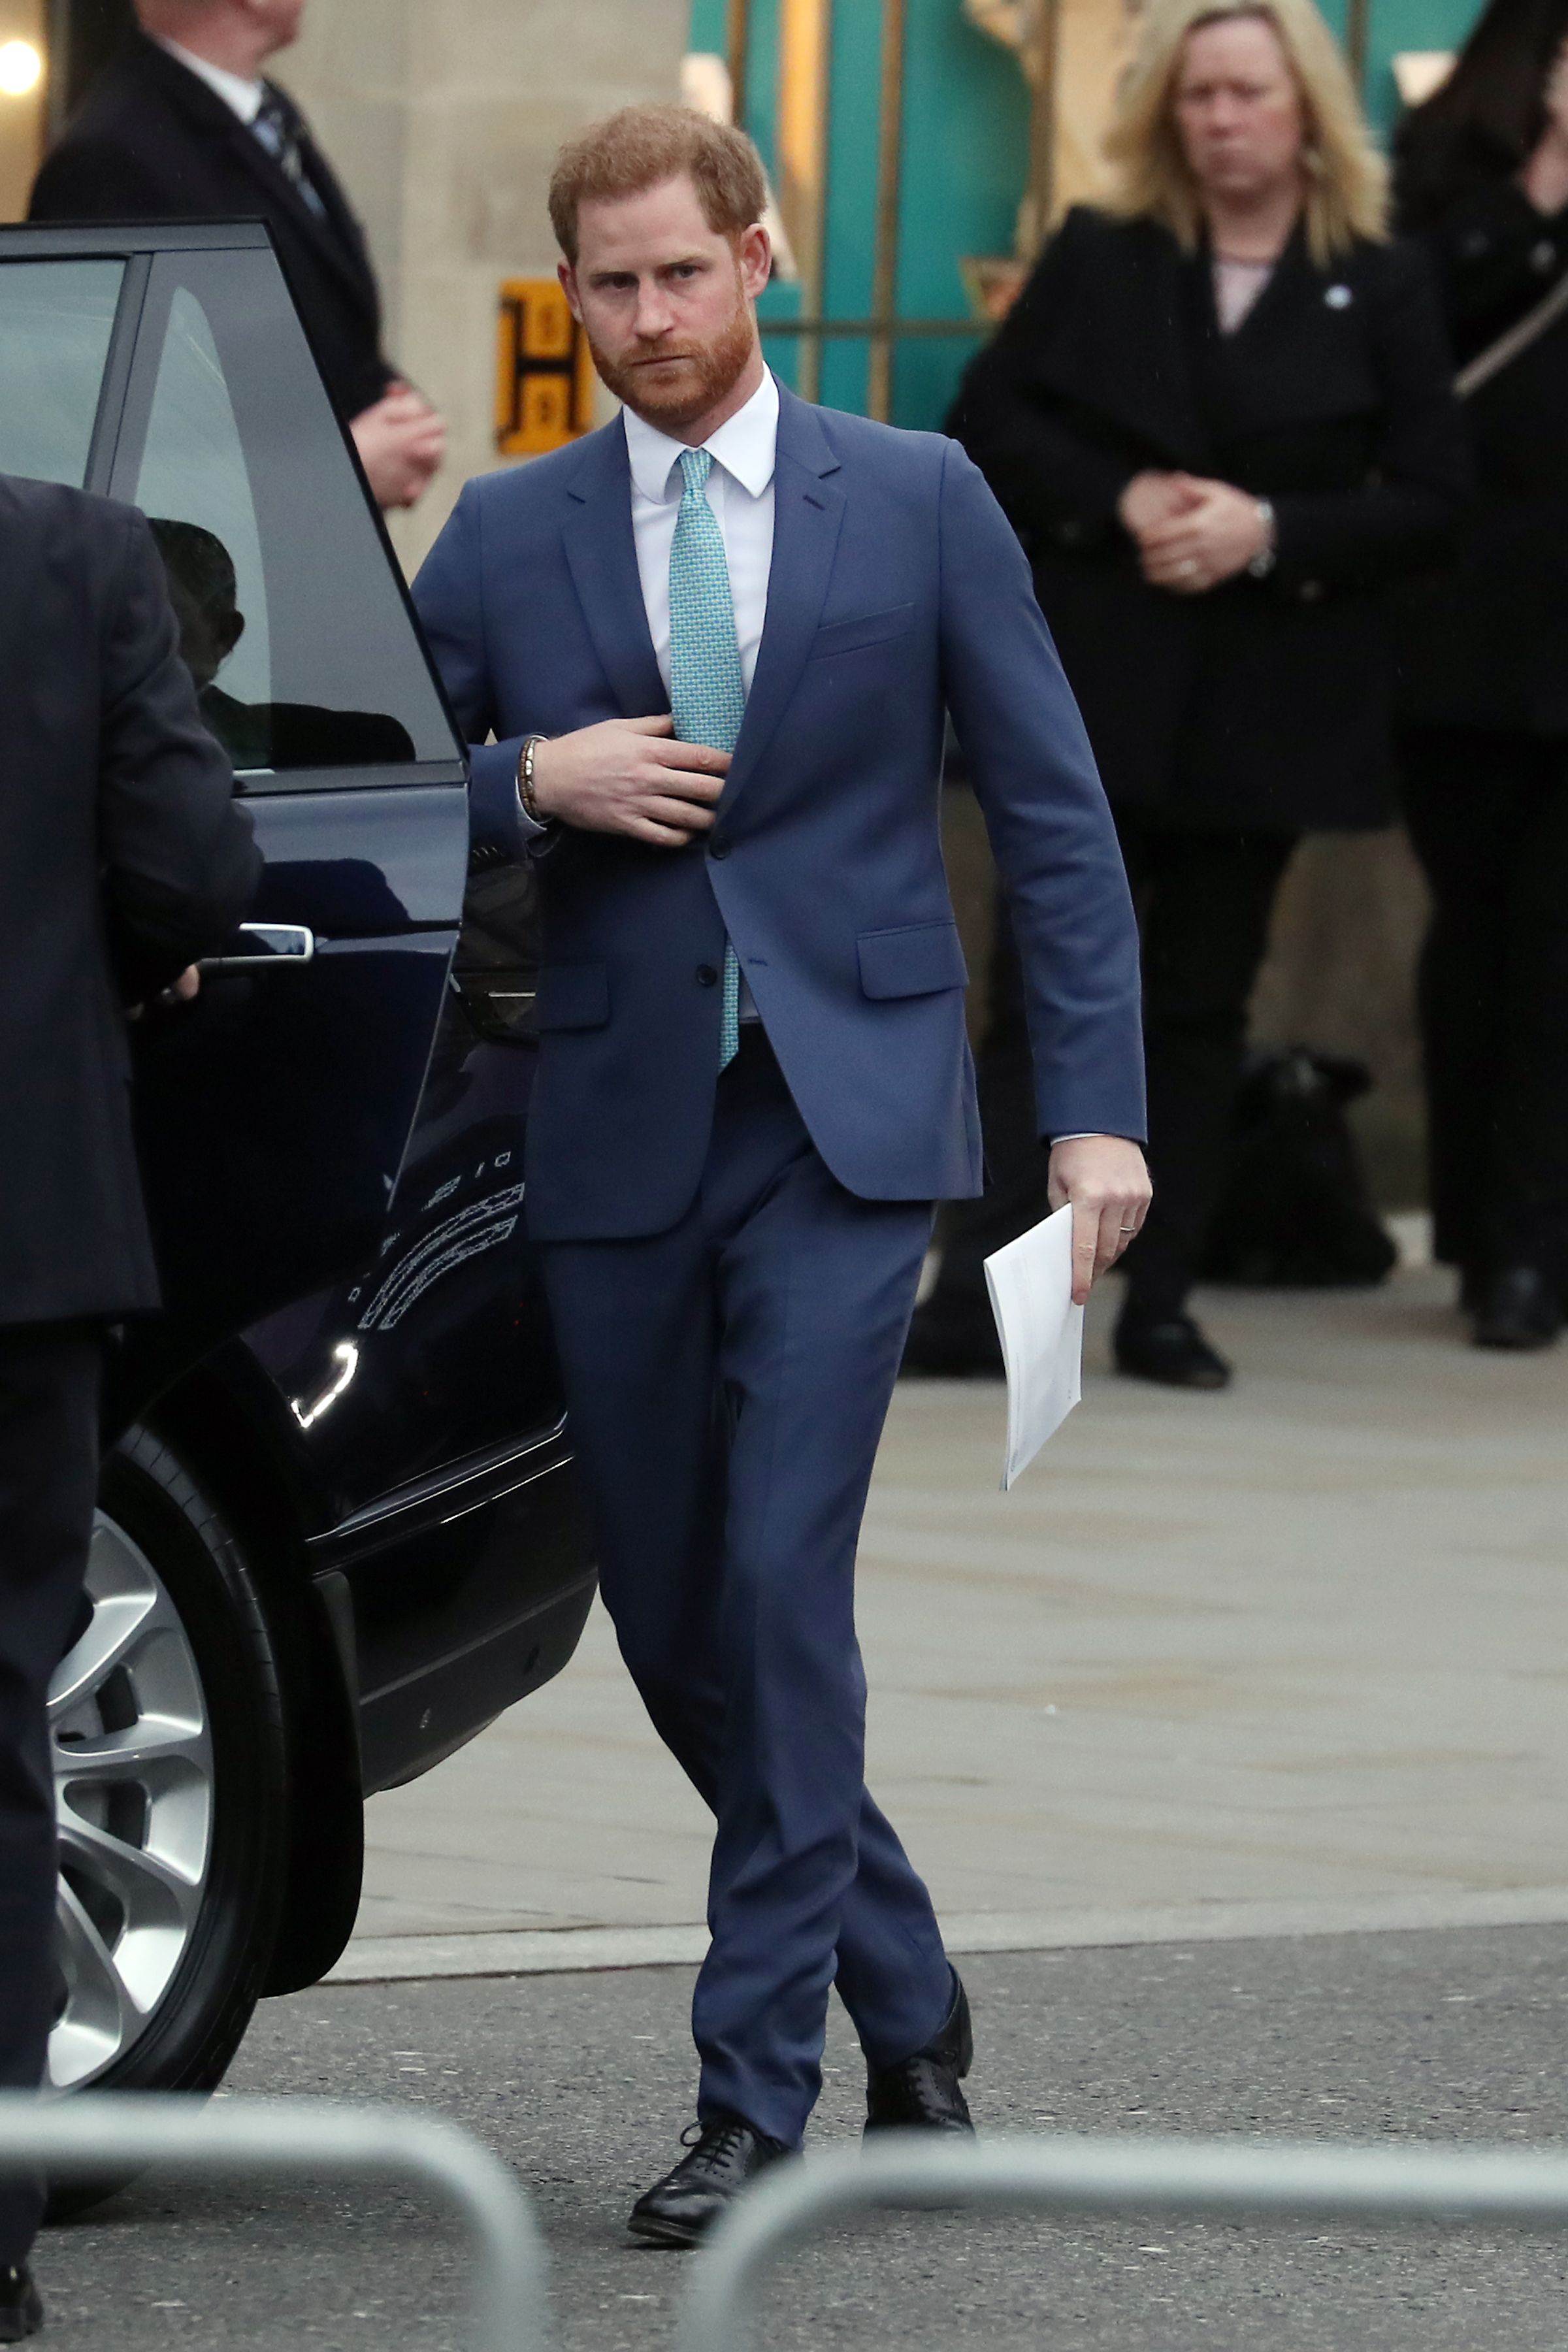 Prince Harry at the Commonwealth Day Service 2020 on March 09, 2020 | Getty Images